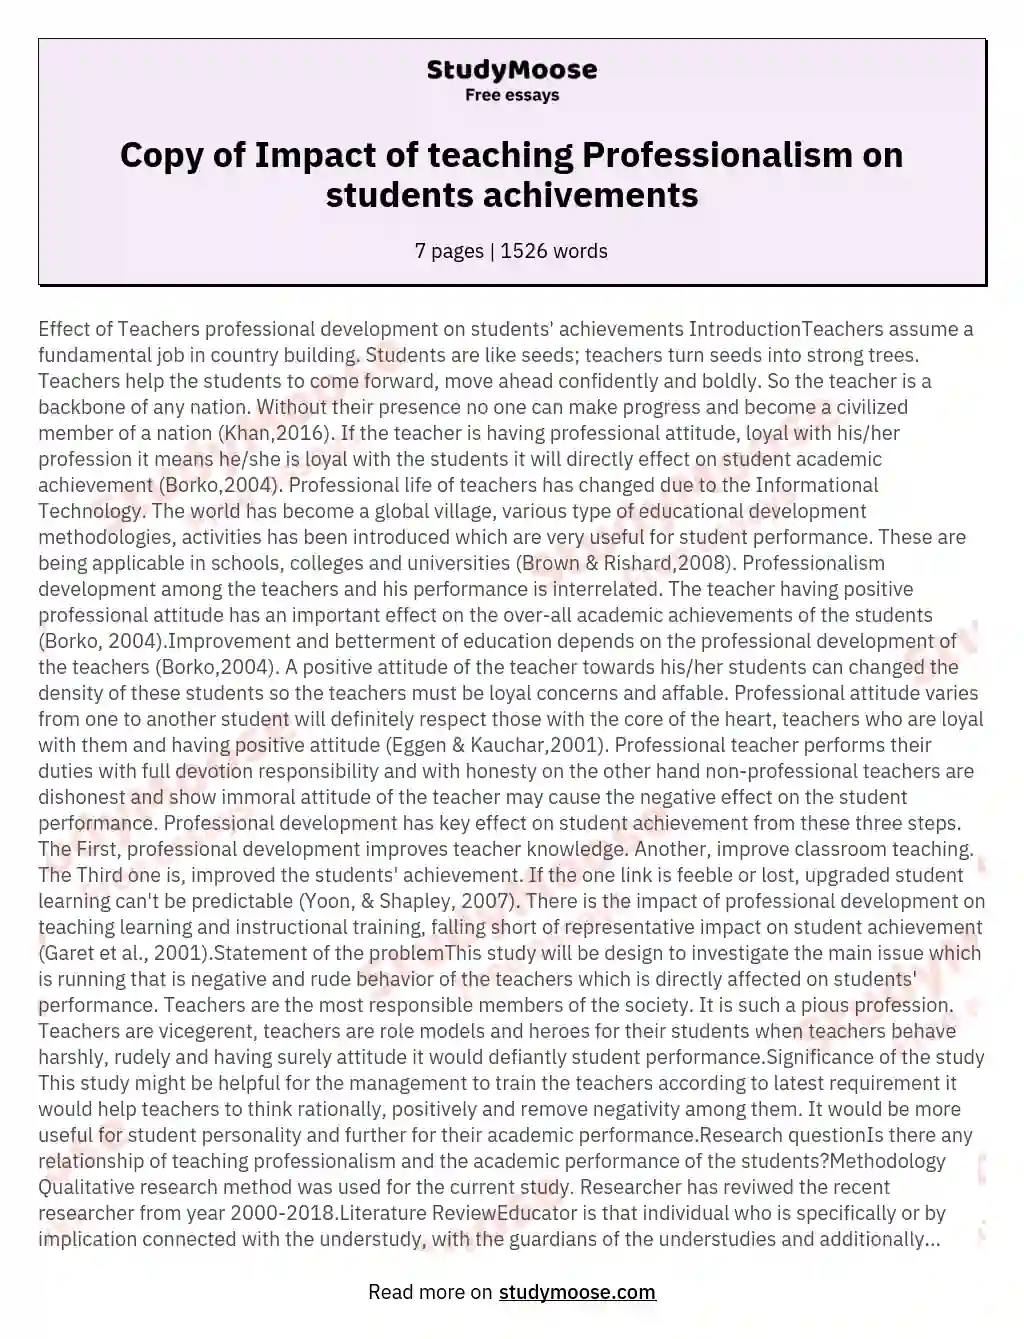 Copy of Impact of teaching Professionalism on students achivements essay